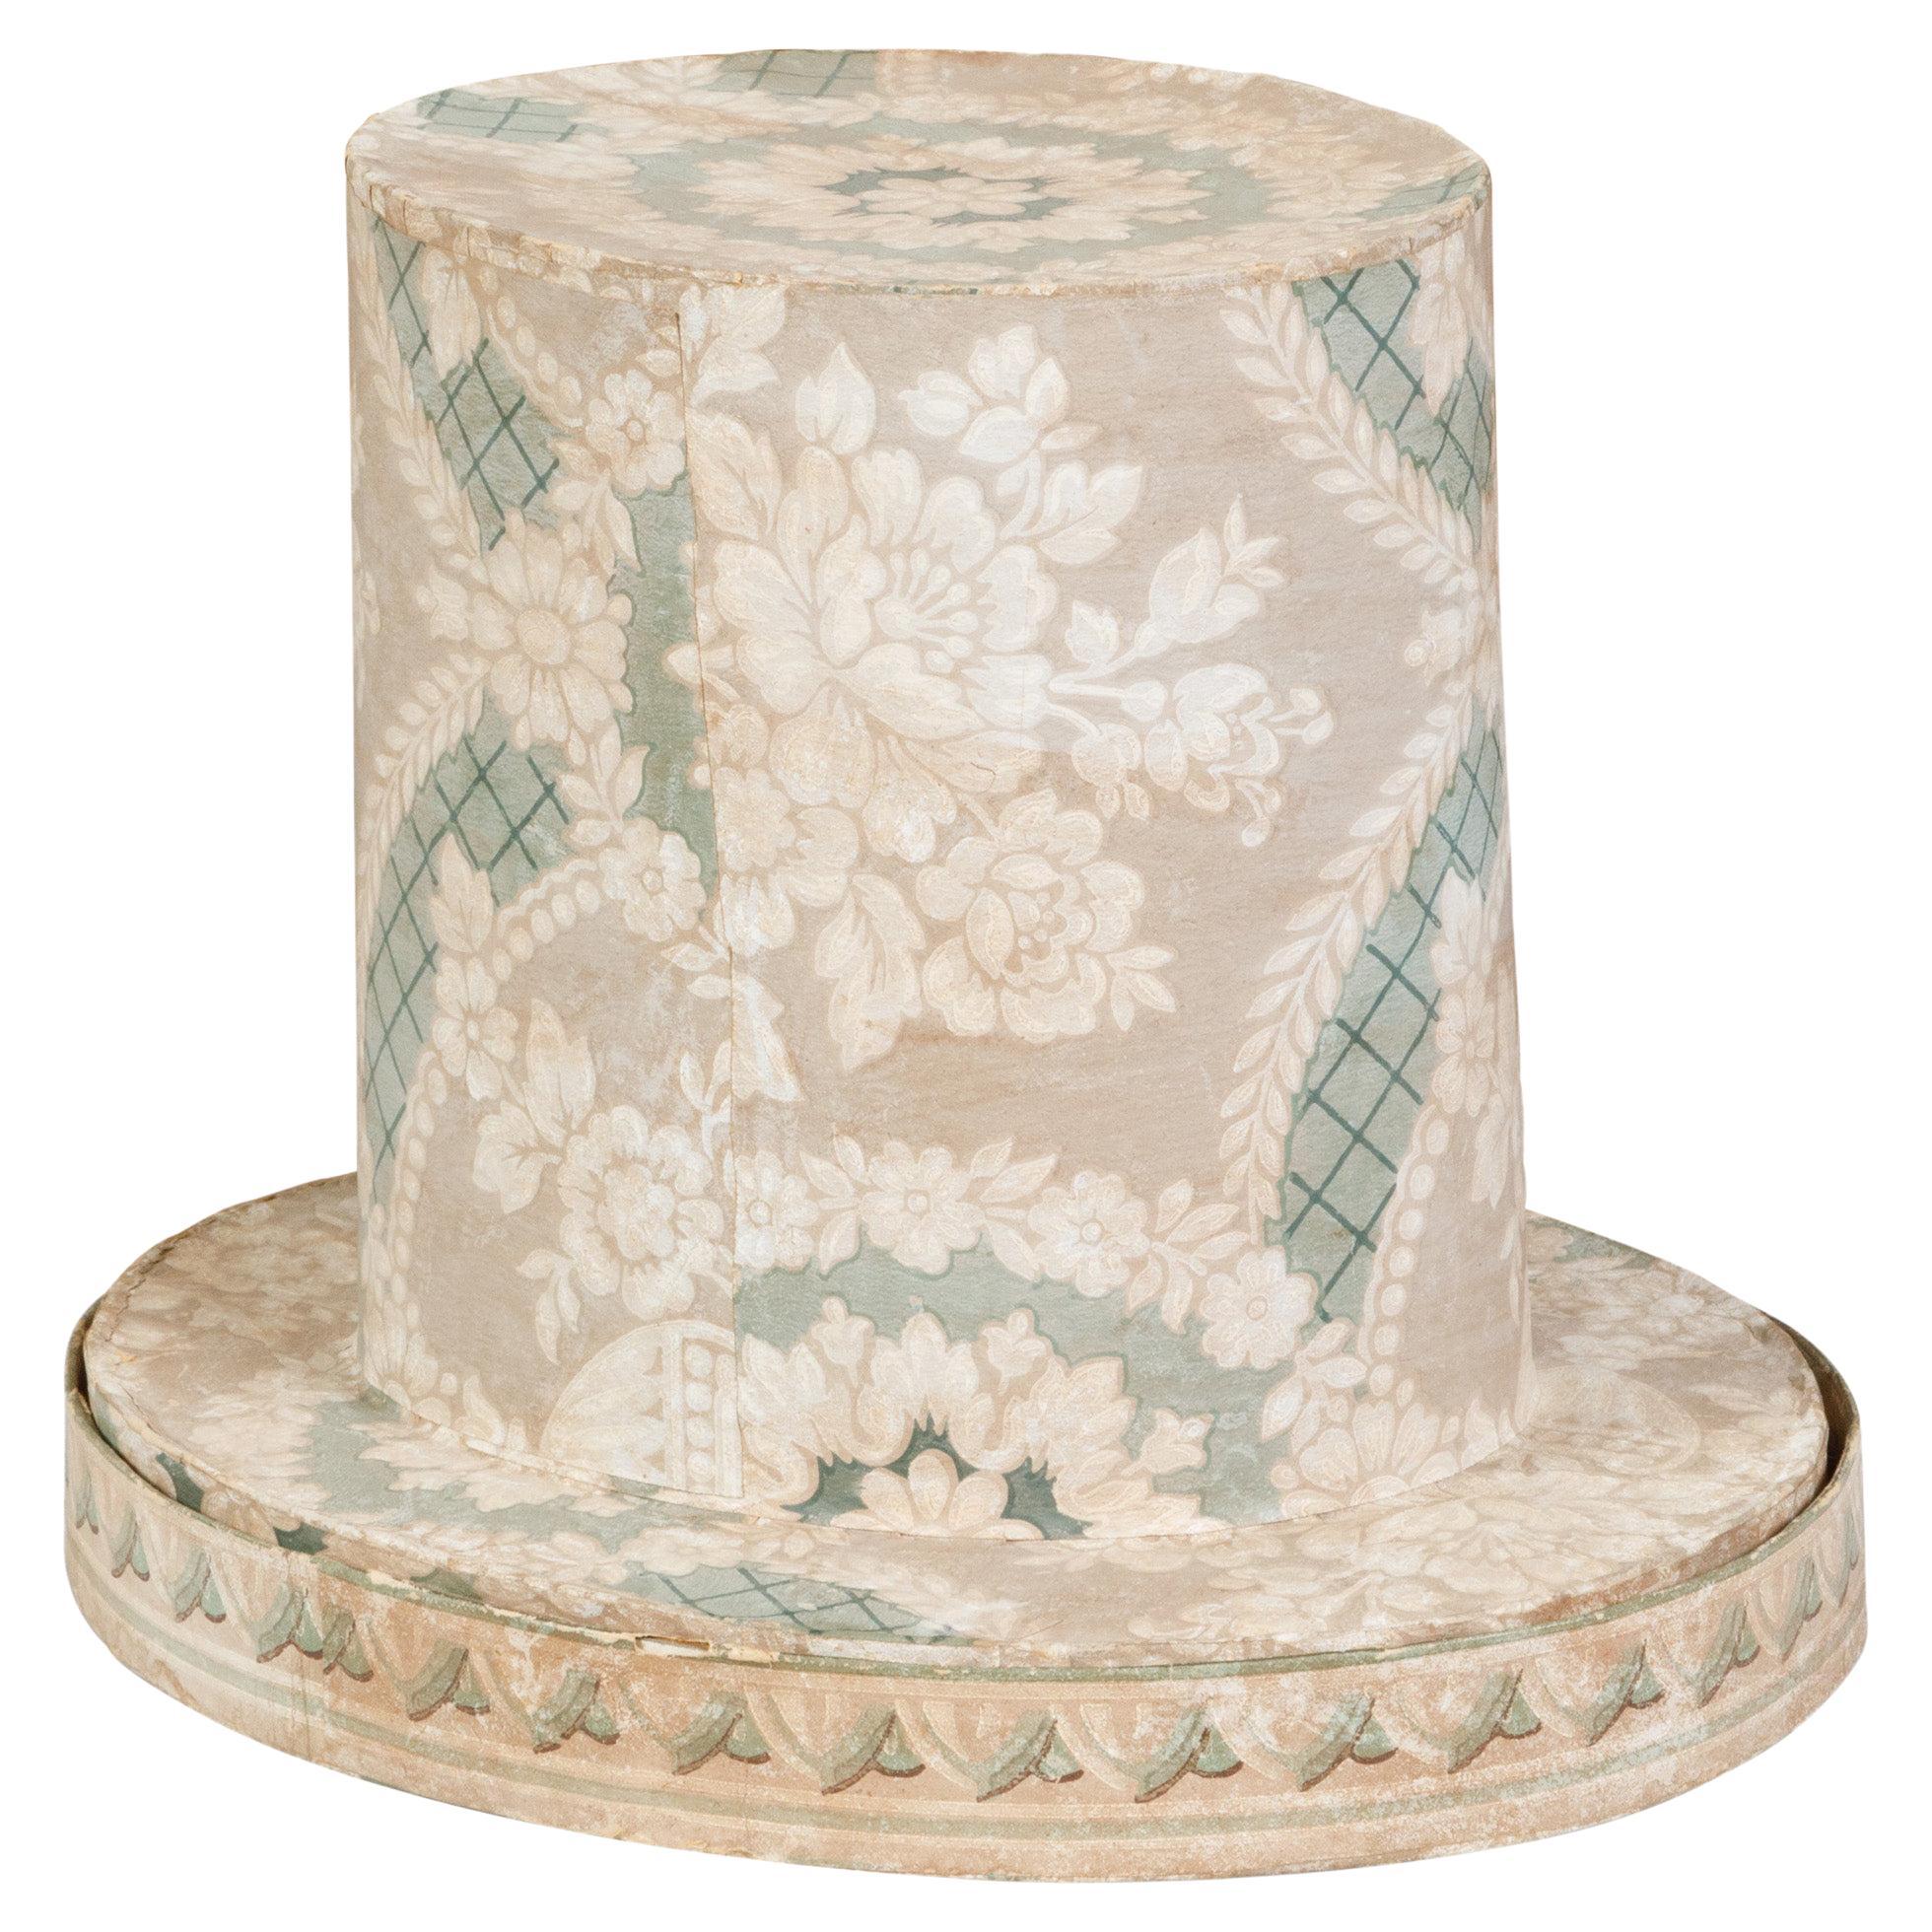 English 19th Century Victorian Period Paper Hat Box with Floral Décor